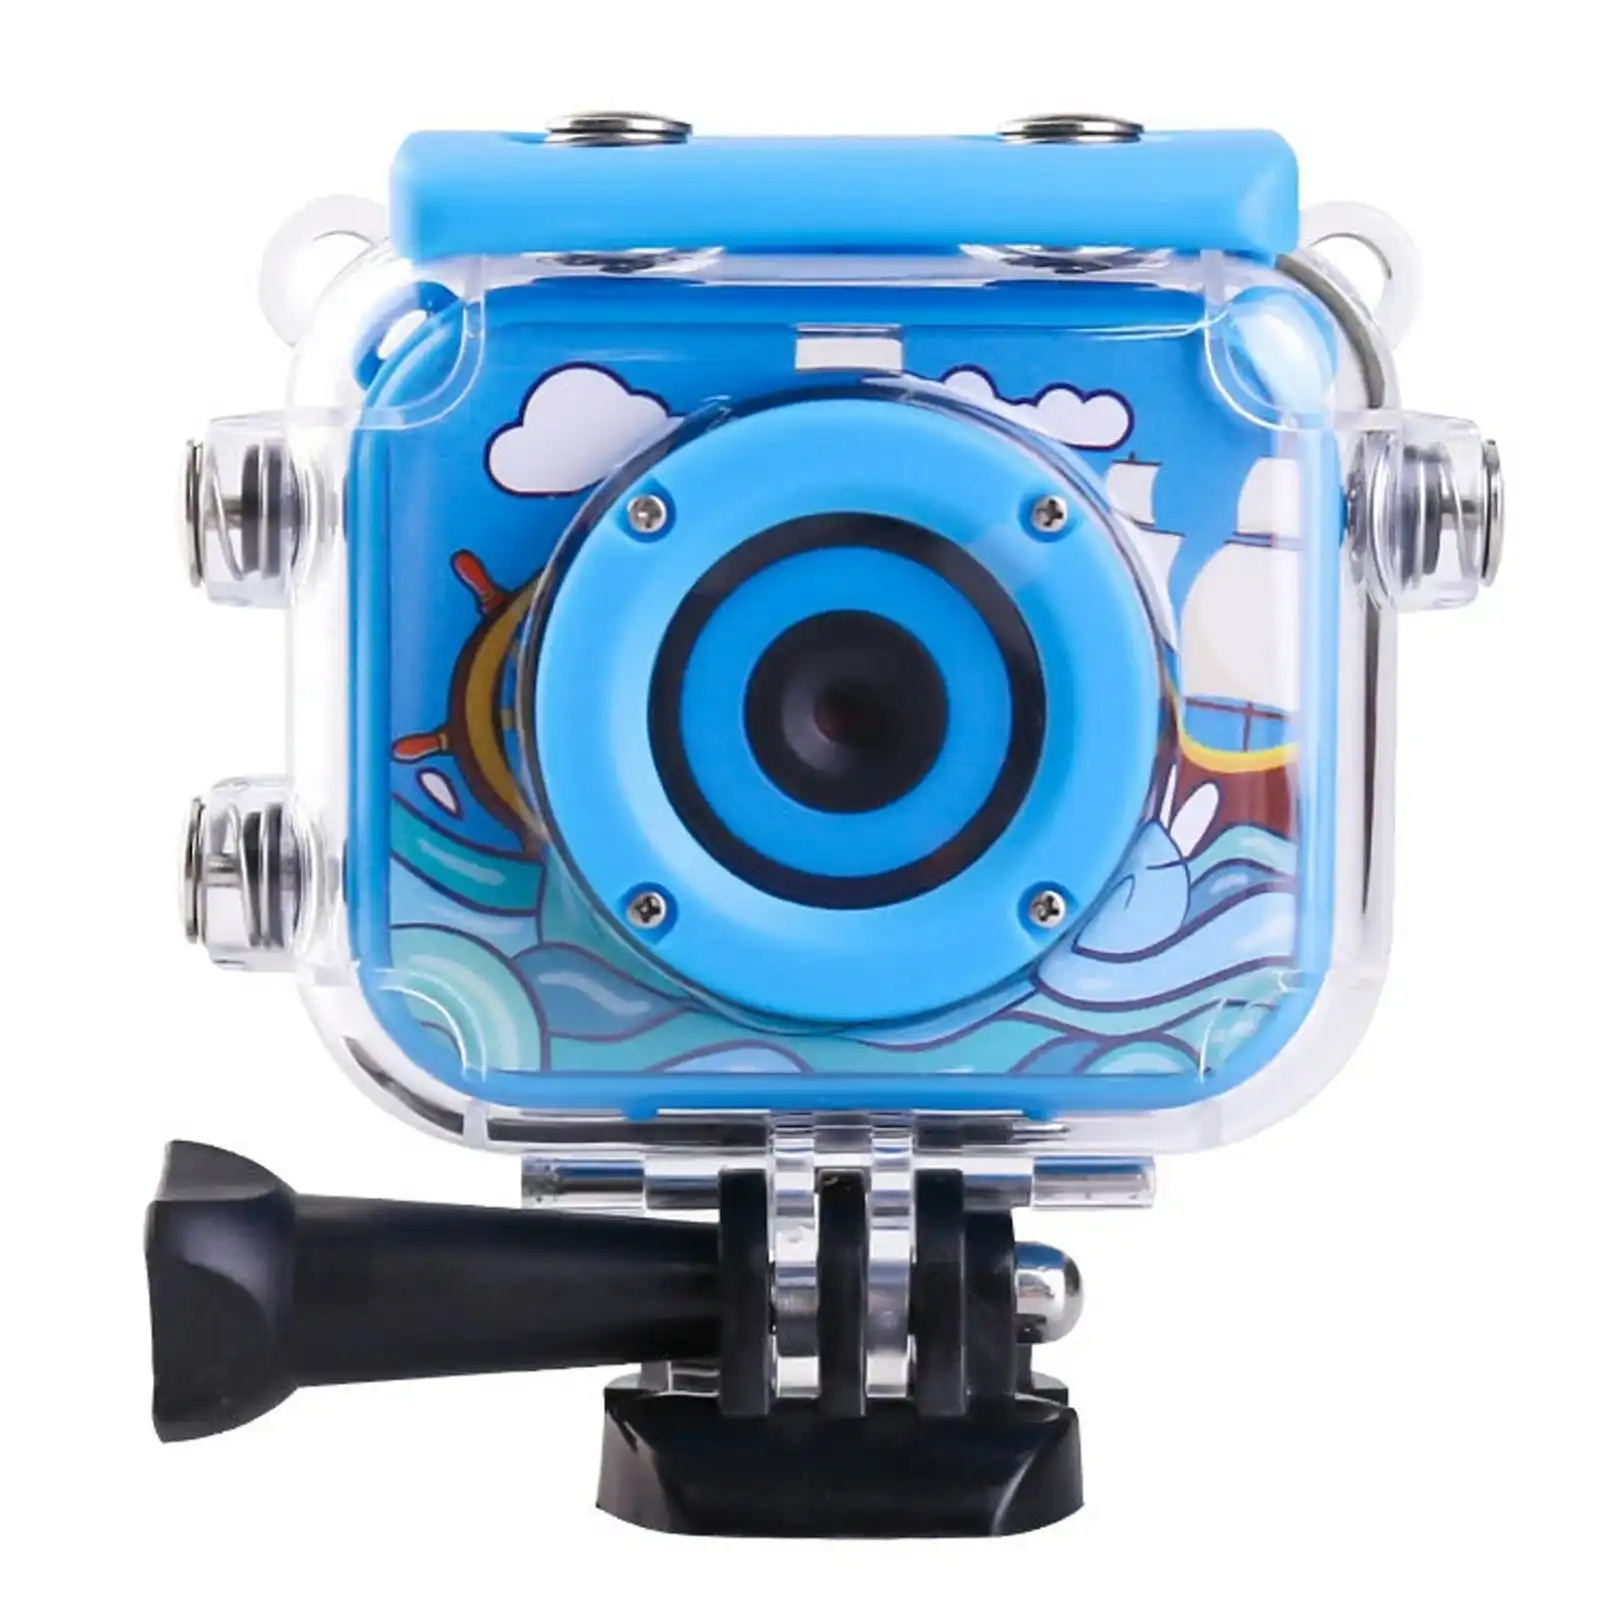 Todo 1080p FHD Kids Action Sports Camera 30M Waterproof 2" LCD Action Cam - Blue